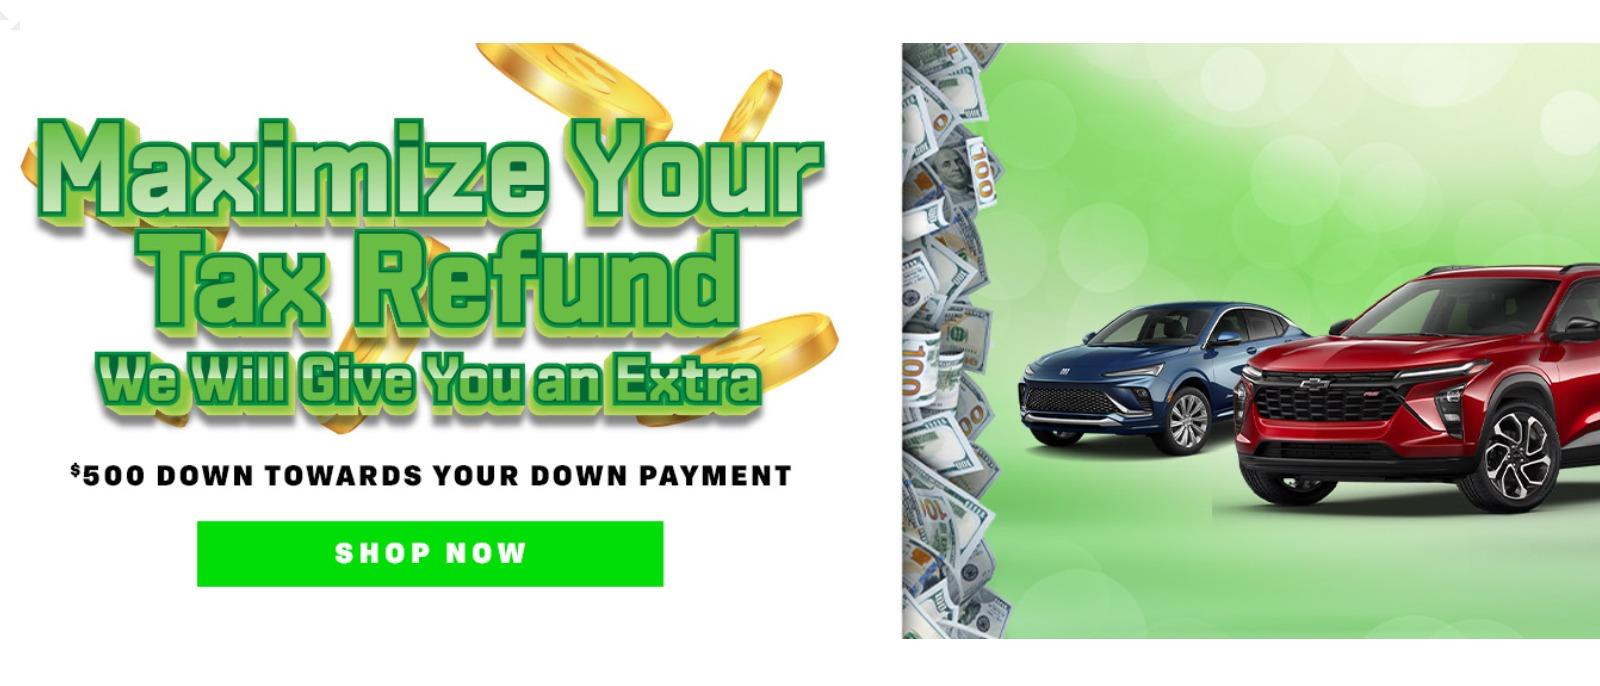 Maximize Your Tax Refund We Will Give You an Extra $500 DOWN TOWARDS YOUR DOWN PAYMENT